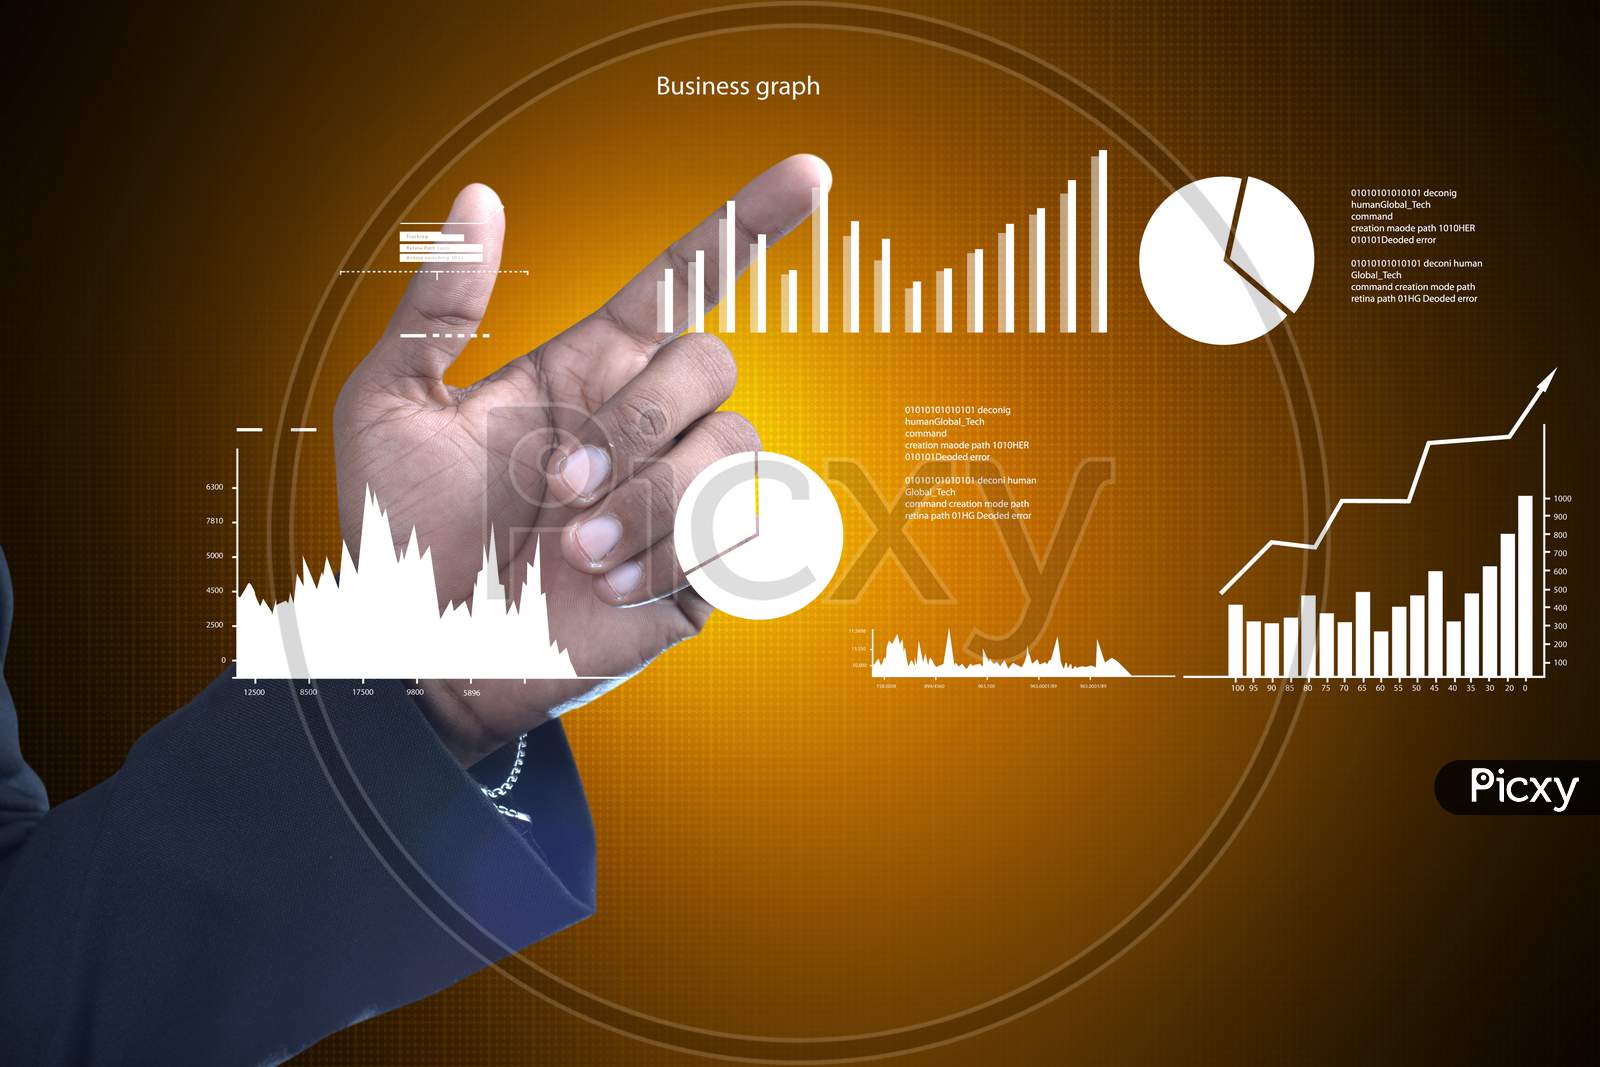 Close up shot of Person's Hands pointing towards Growth Bars and Pie Charts